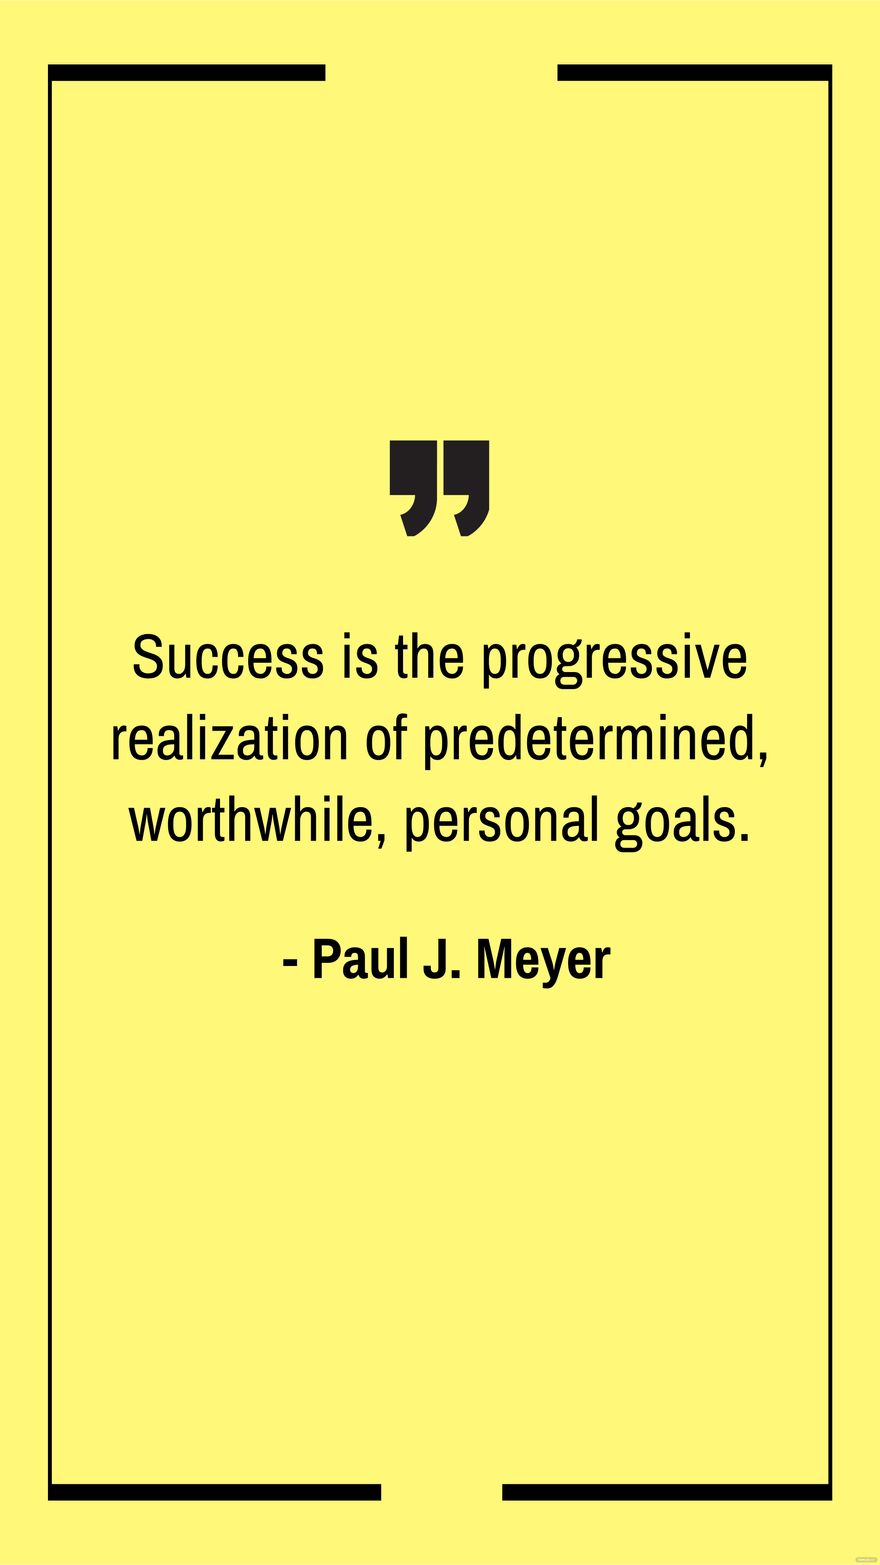 Free Paul J. Meyer - Success is the progressive realization of predetermined, worthwhile, personal goals. in JPG